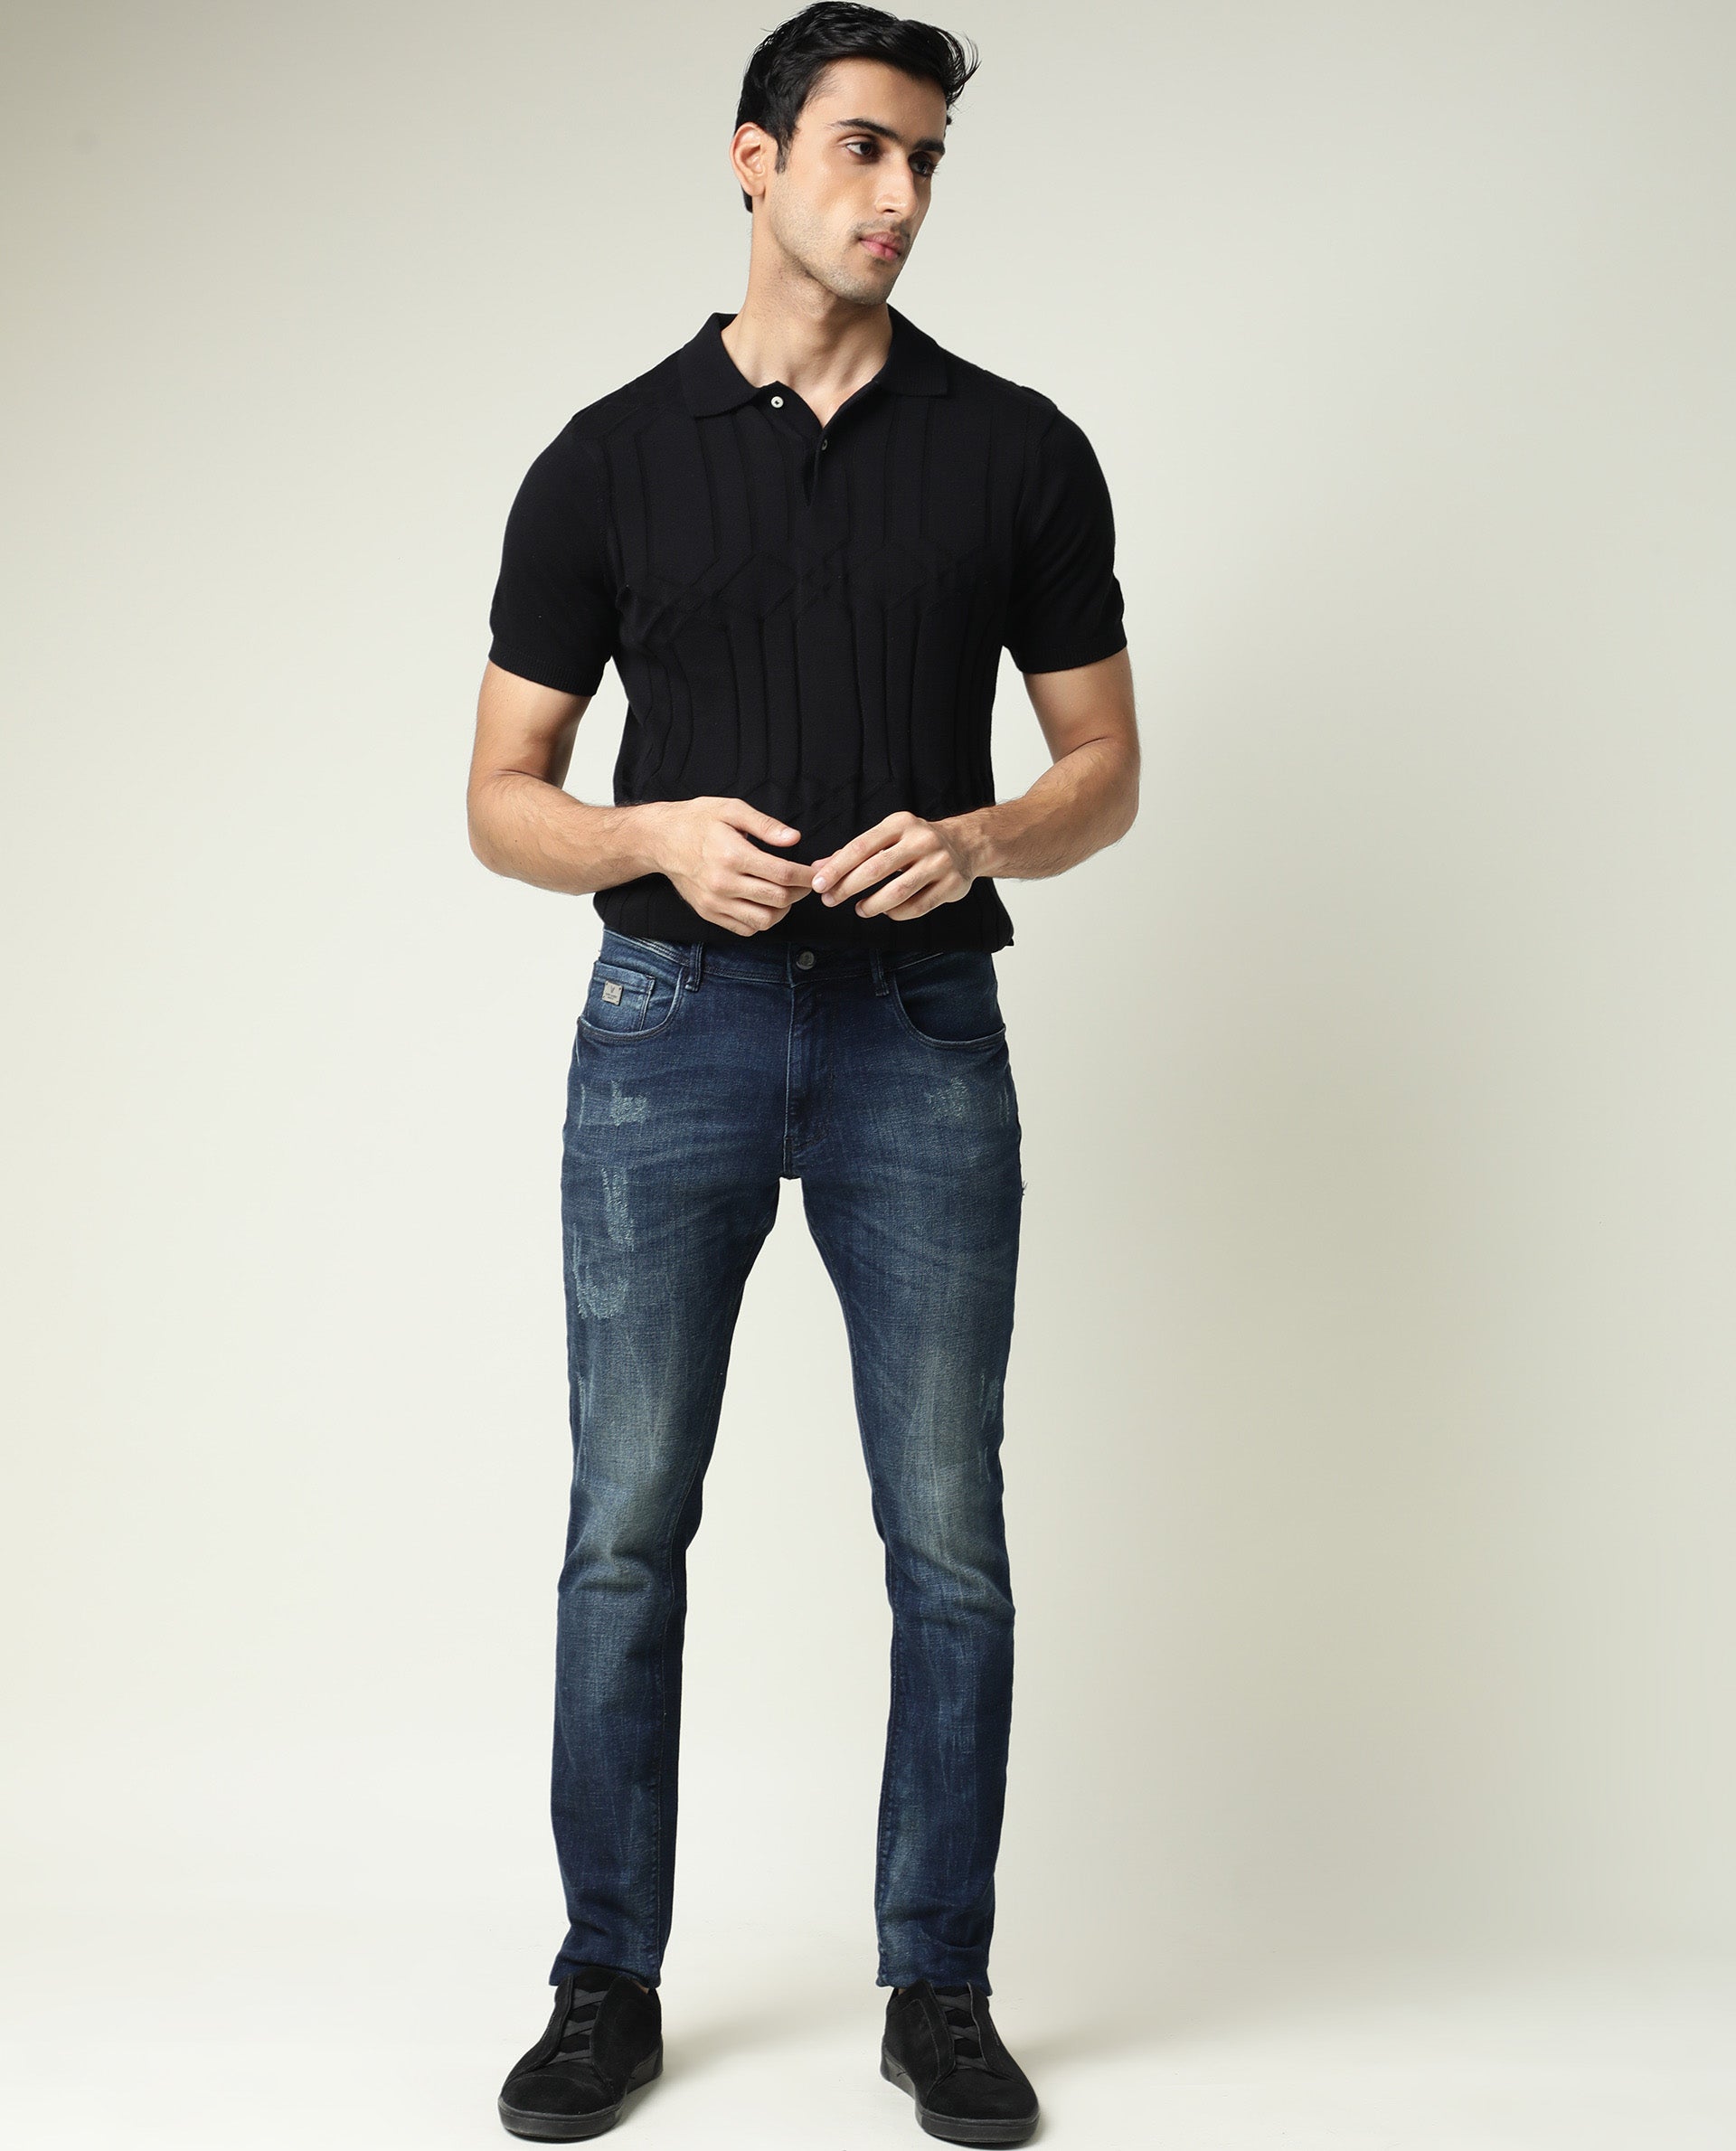 Cottonking | Exclusive Sale of Men's Branded Jeans Pant